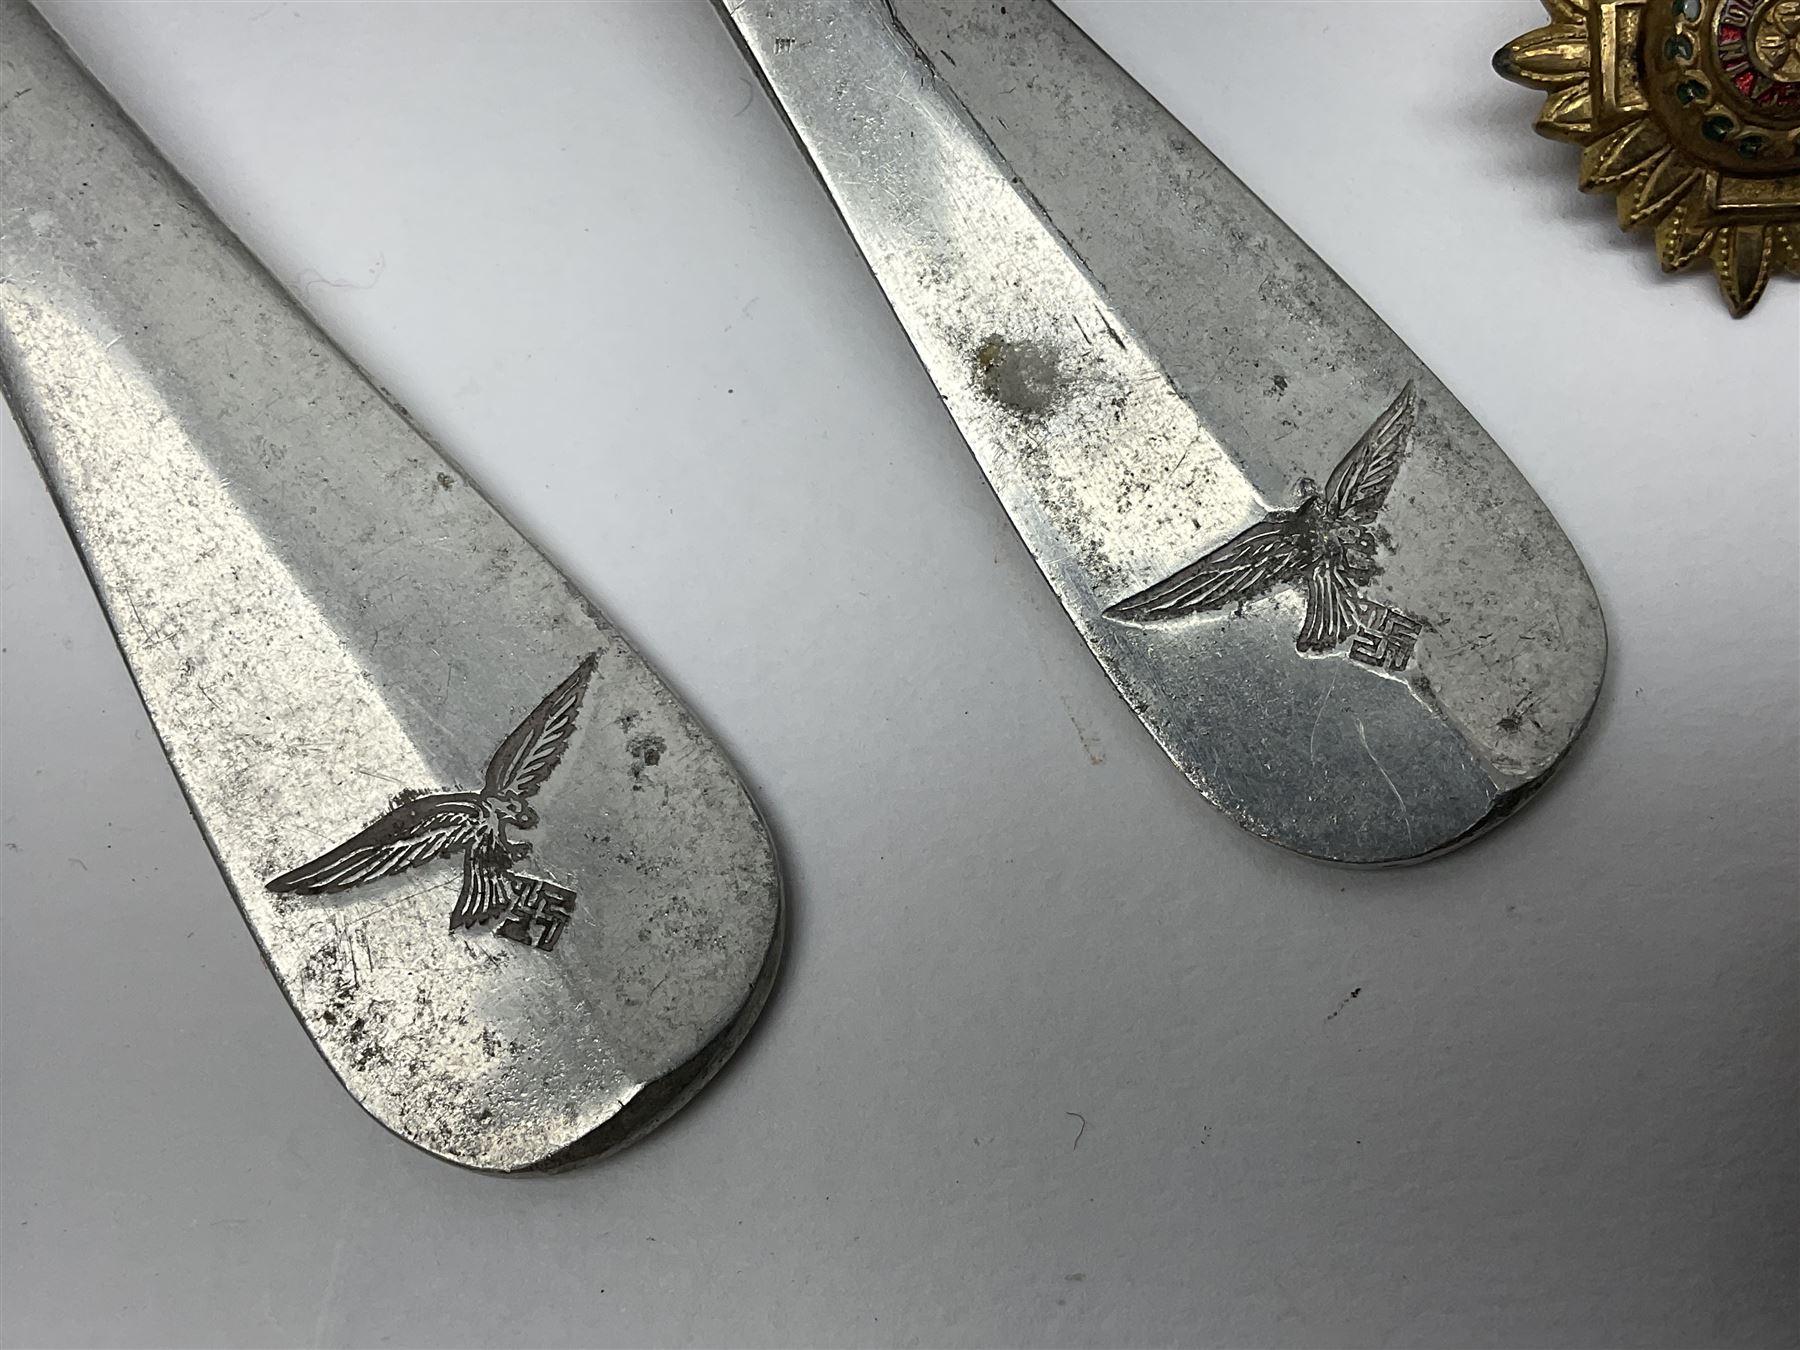 WW2 German Luftwaffe Mess cutlery comprising table spoon and fork - Image 7 of 16